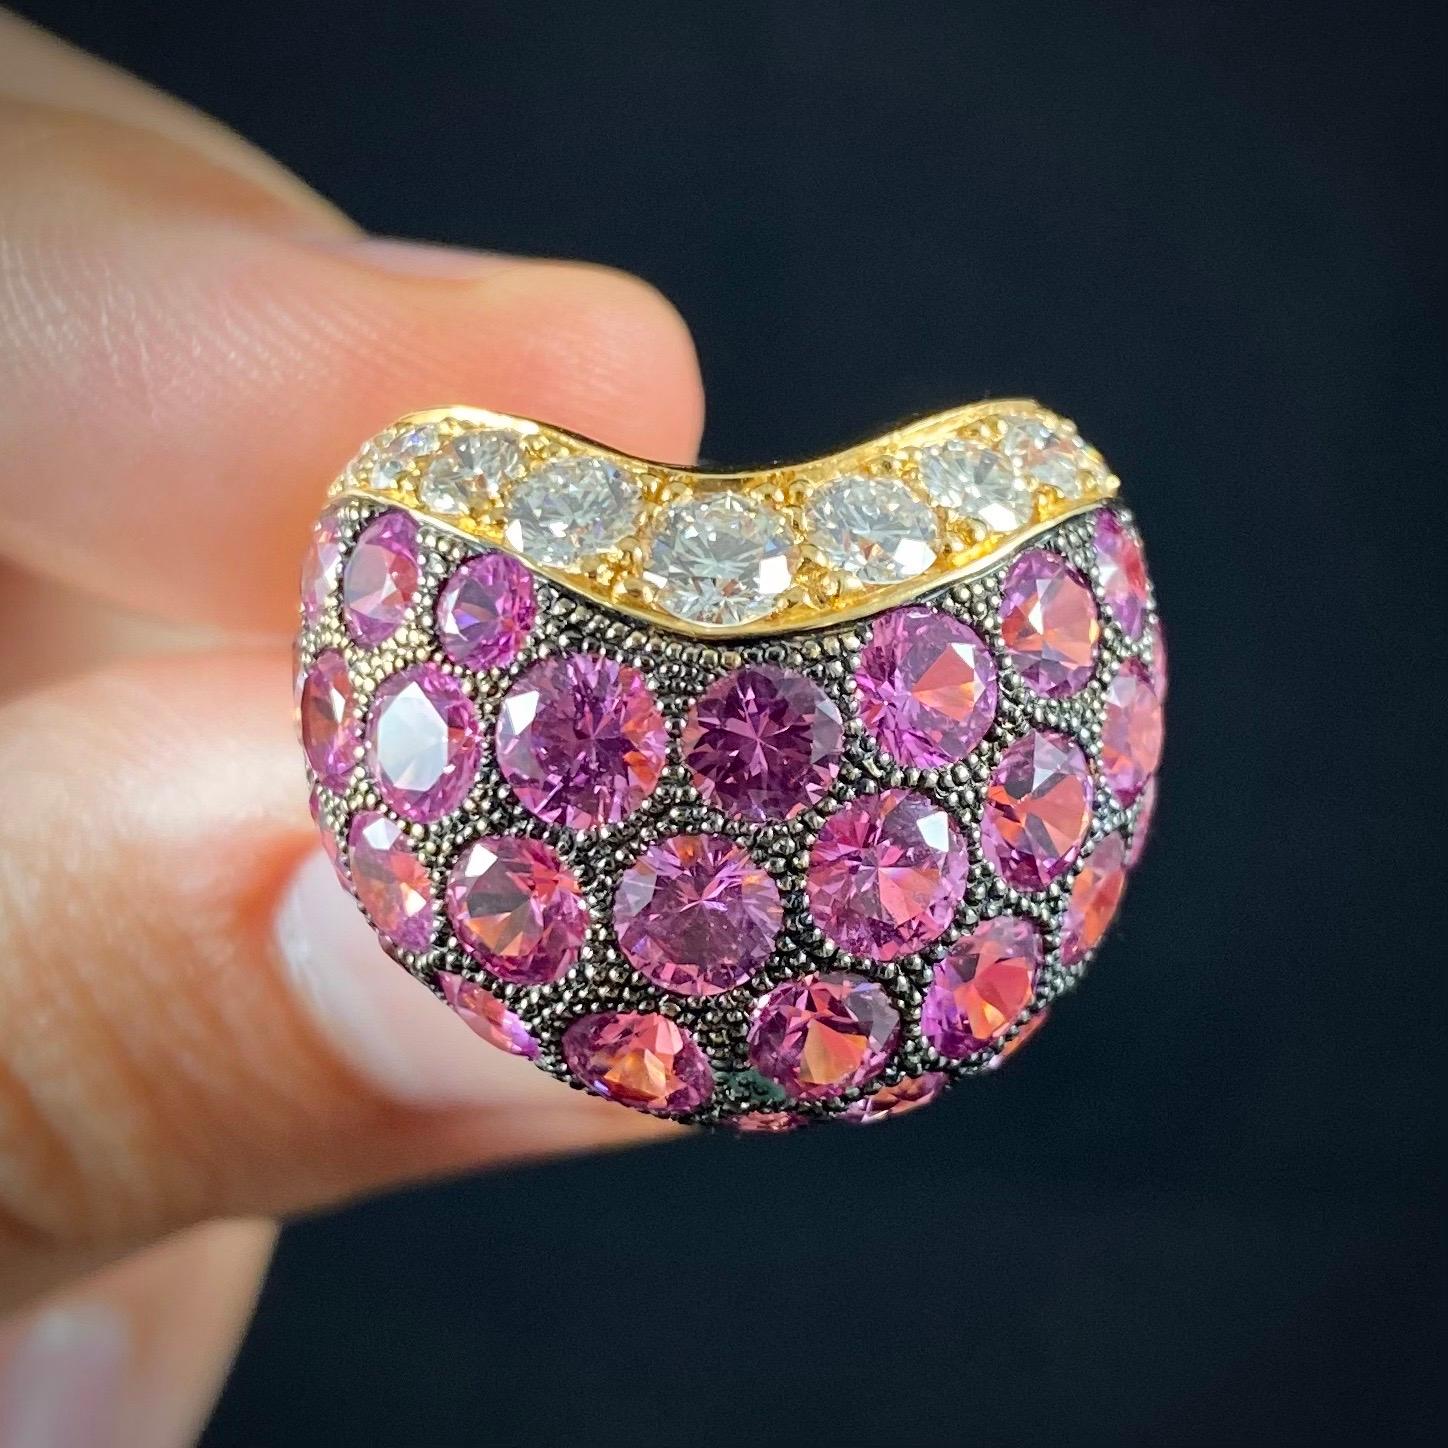 de GRISOGONO pink sapphire and diamond wishbone-shape bombe cocktail ring in 18kt yellow gold, circa 2000. Of a domed fishbone design, this ring is pave-set throughout with 42 circular-cut pink/purple sapphires of graduated sizes pave-set in